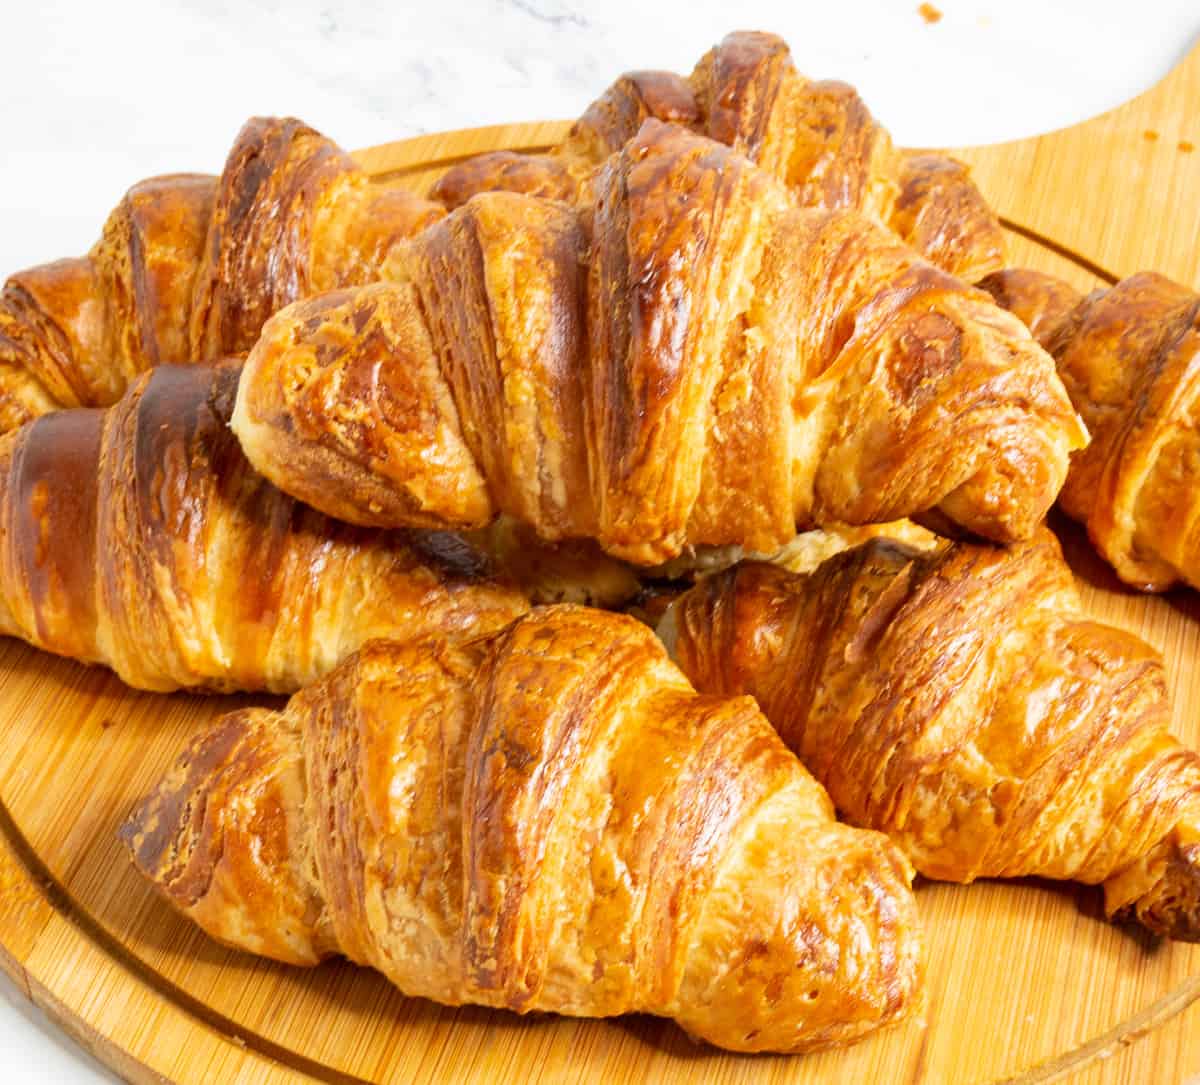 Stack of Croissants on a wooden board.